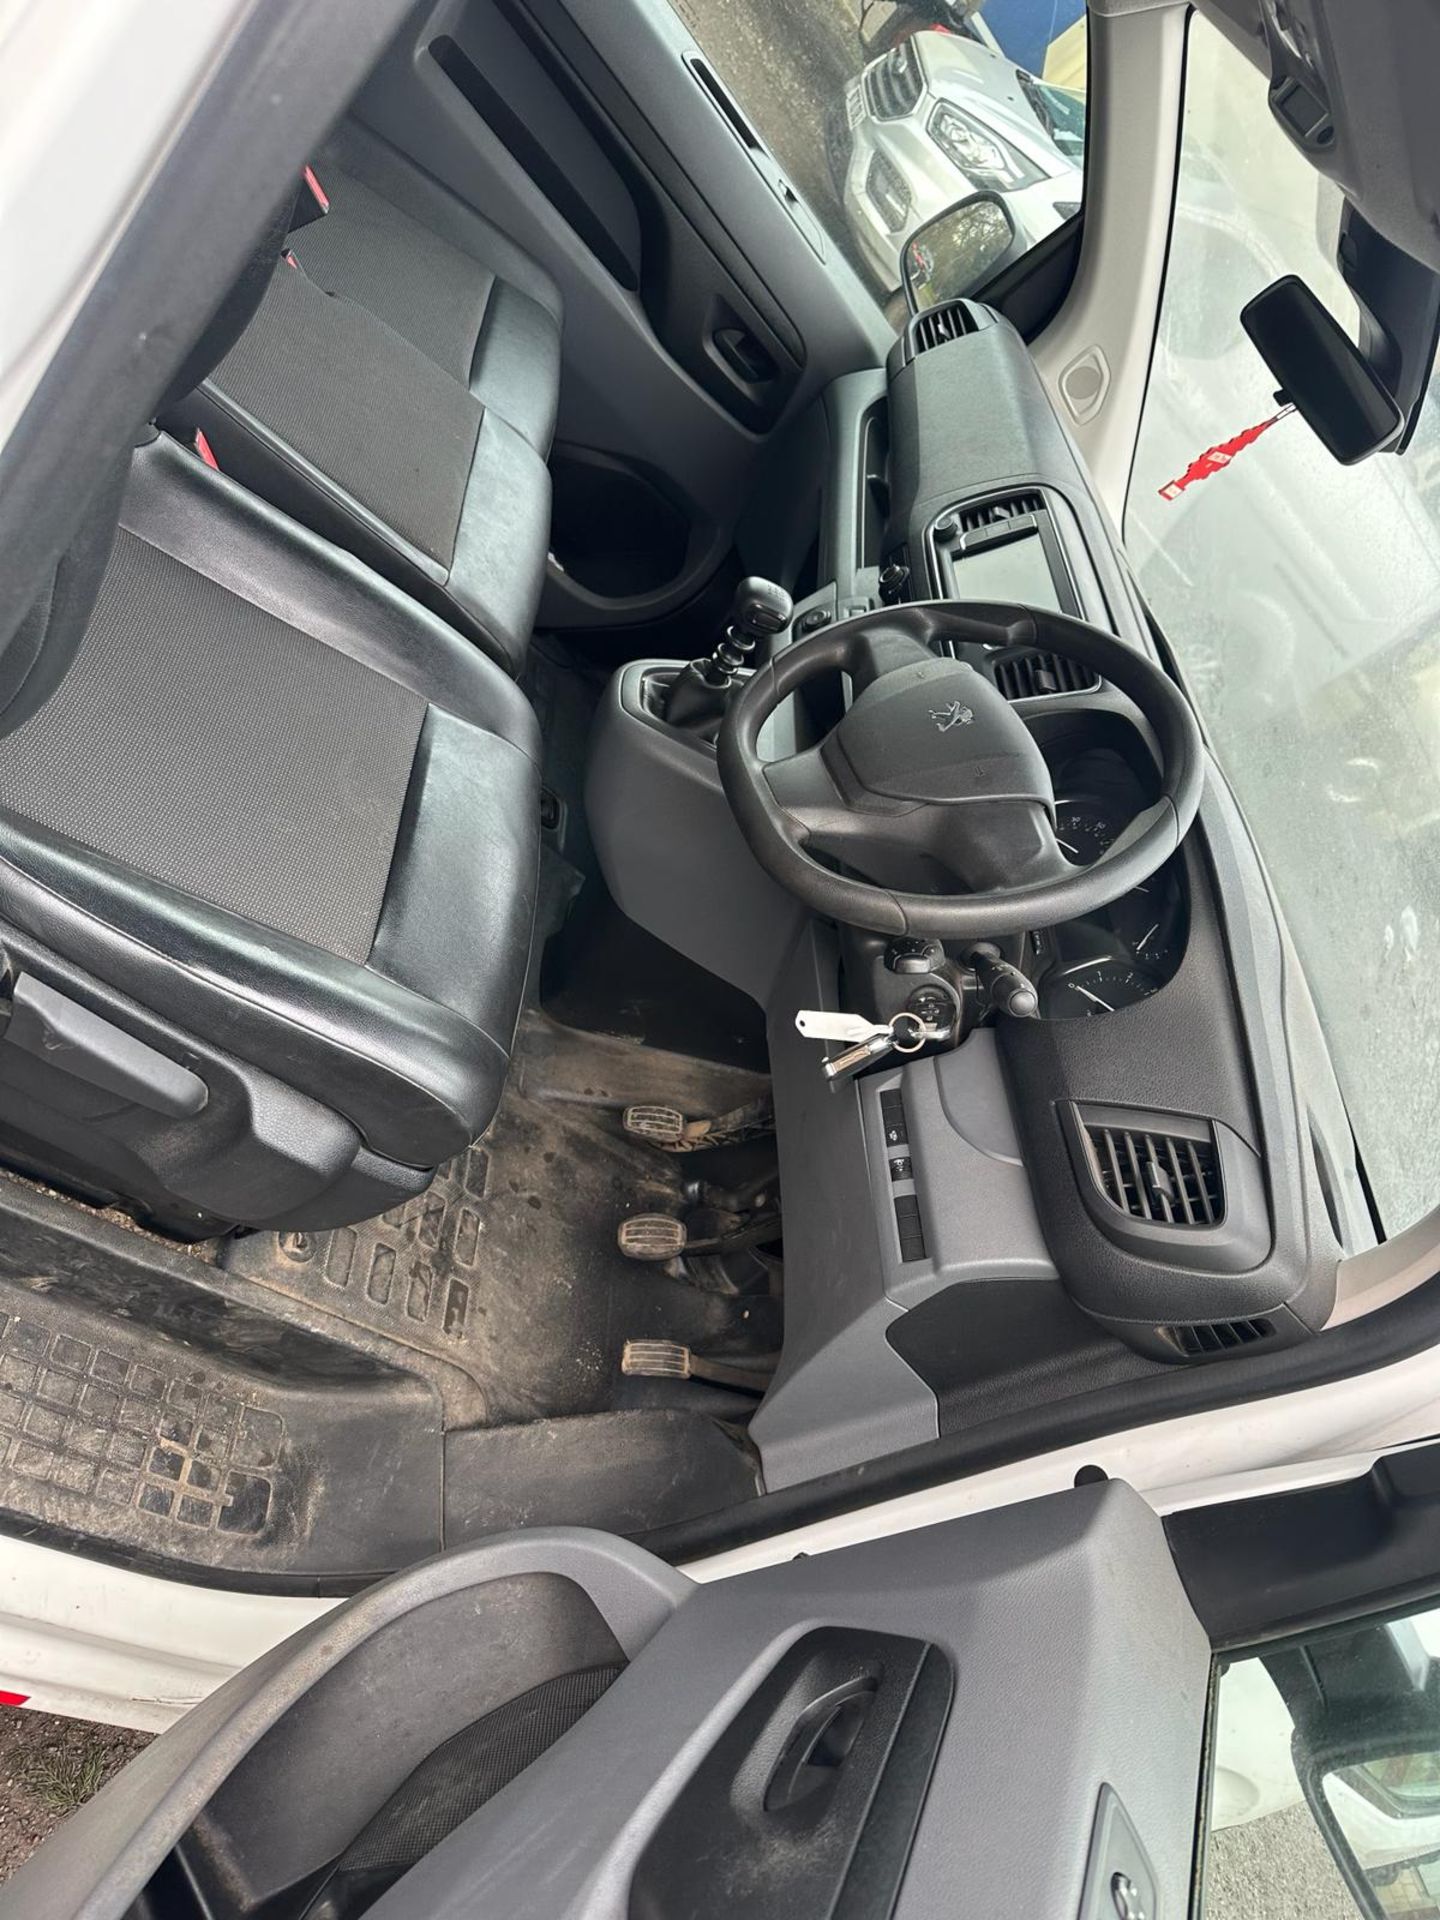 2019 69 PEUGEOT EXPERT PANEL VAN - 140K MILES - AIR CON - PLY LINED - Image 2 of 10